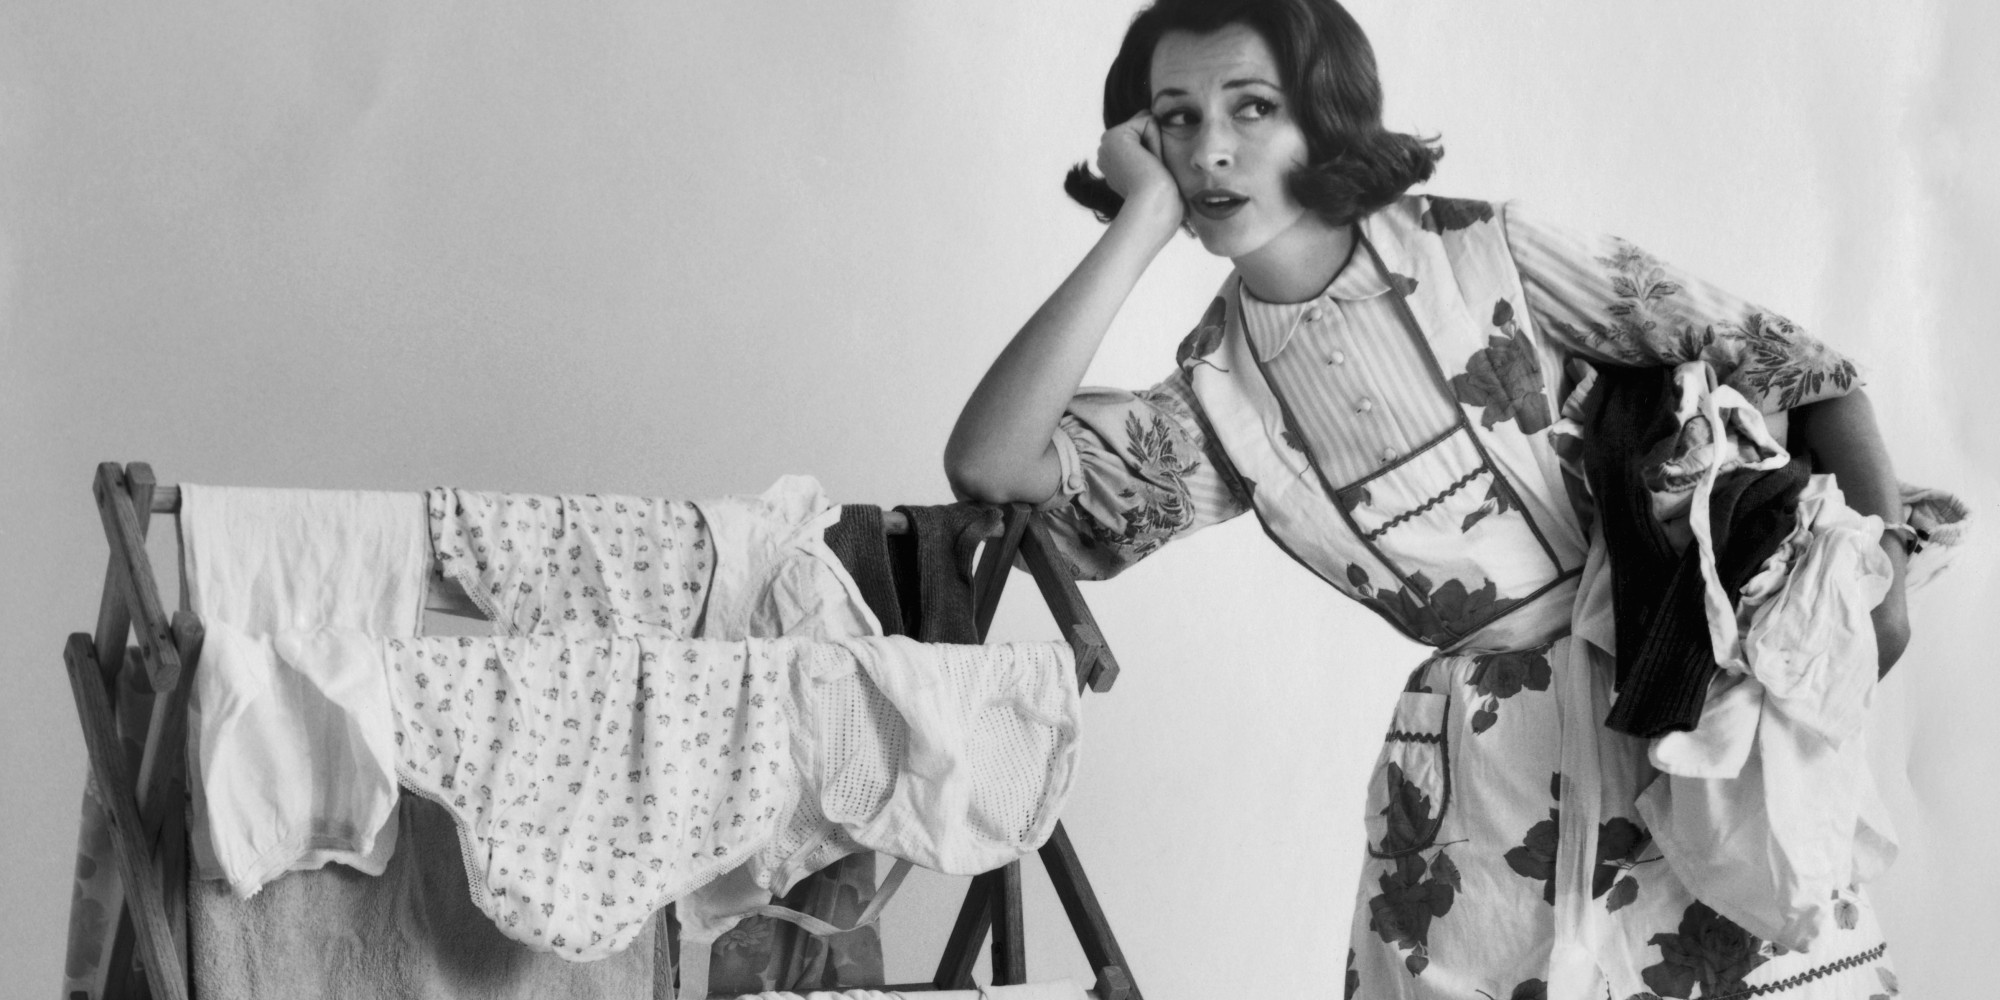 Young woman leaning on a drying rack